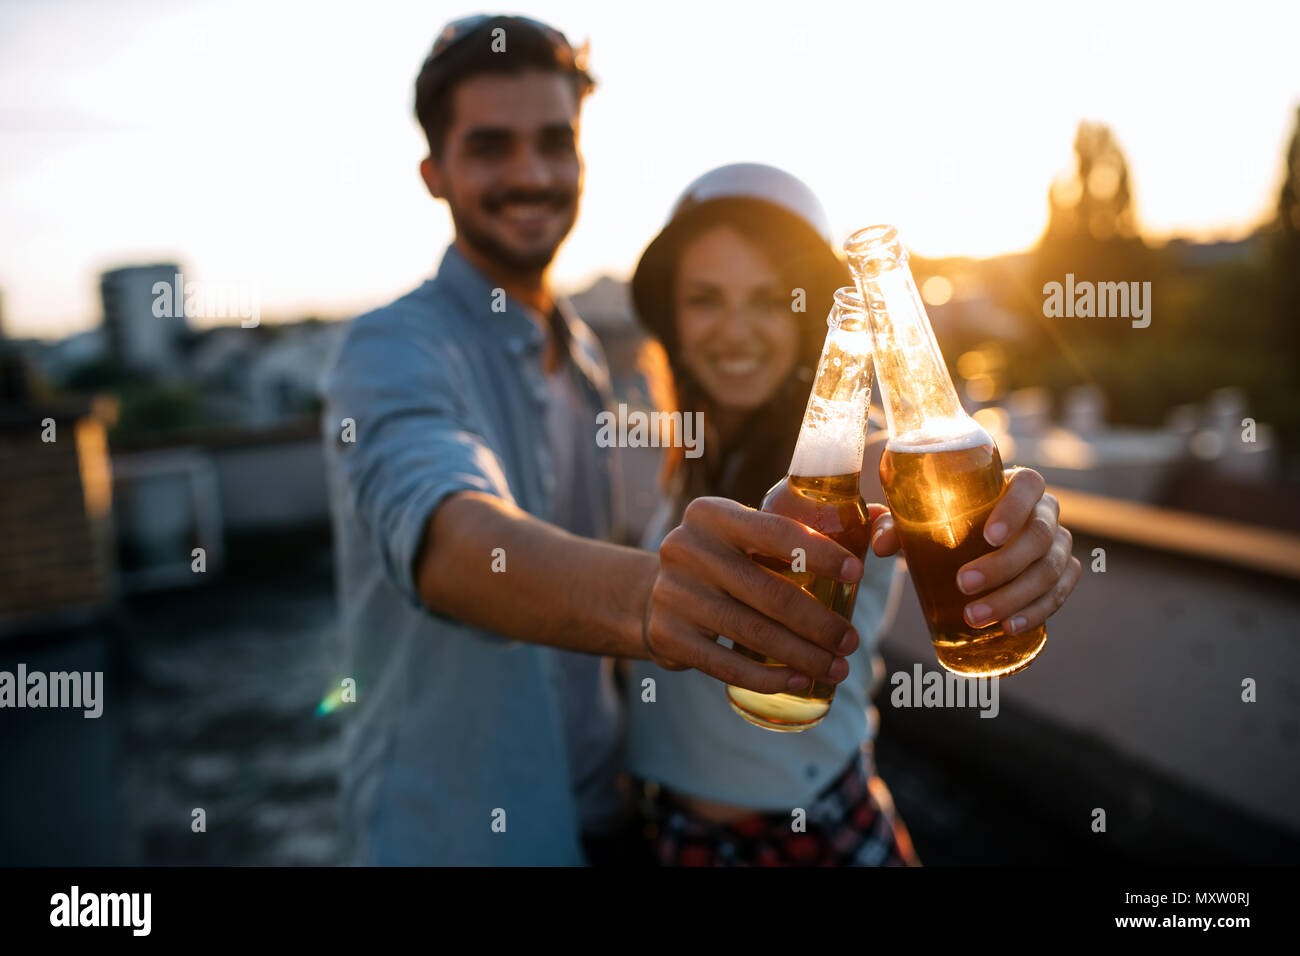 Young happy couple toasting with beer outdoors Banque D'Images